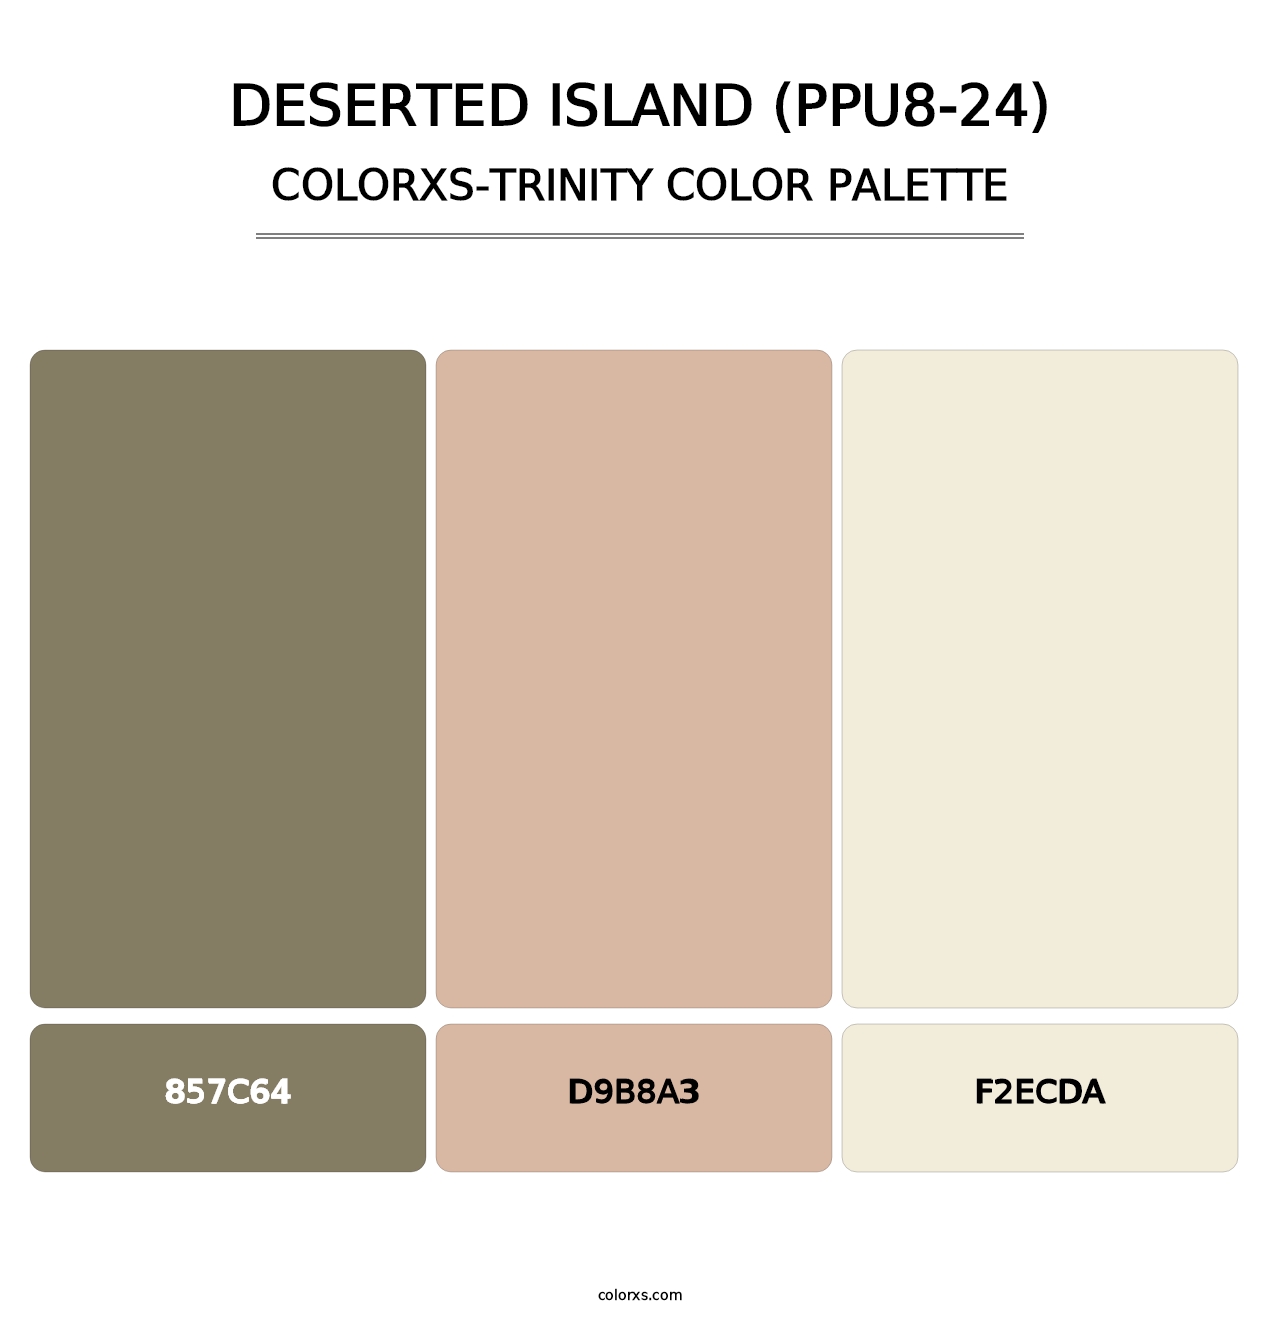 Deserted Island (PPU8-24) - Colorxs Trinity Palette